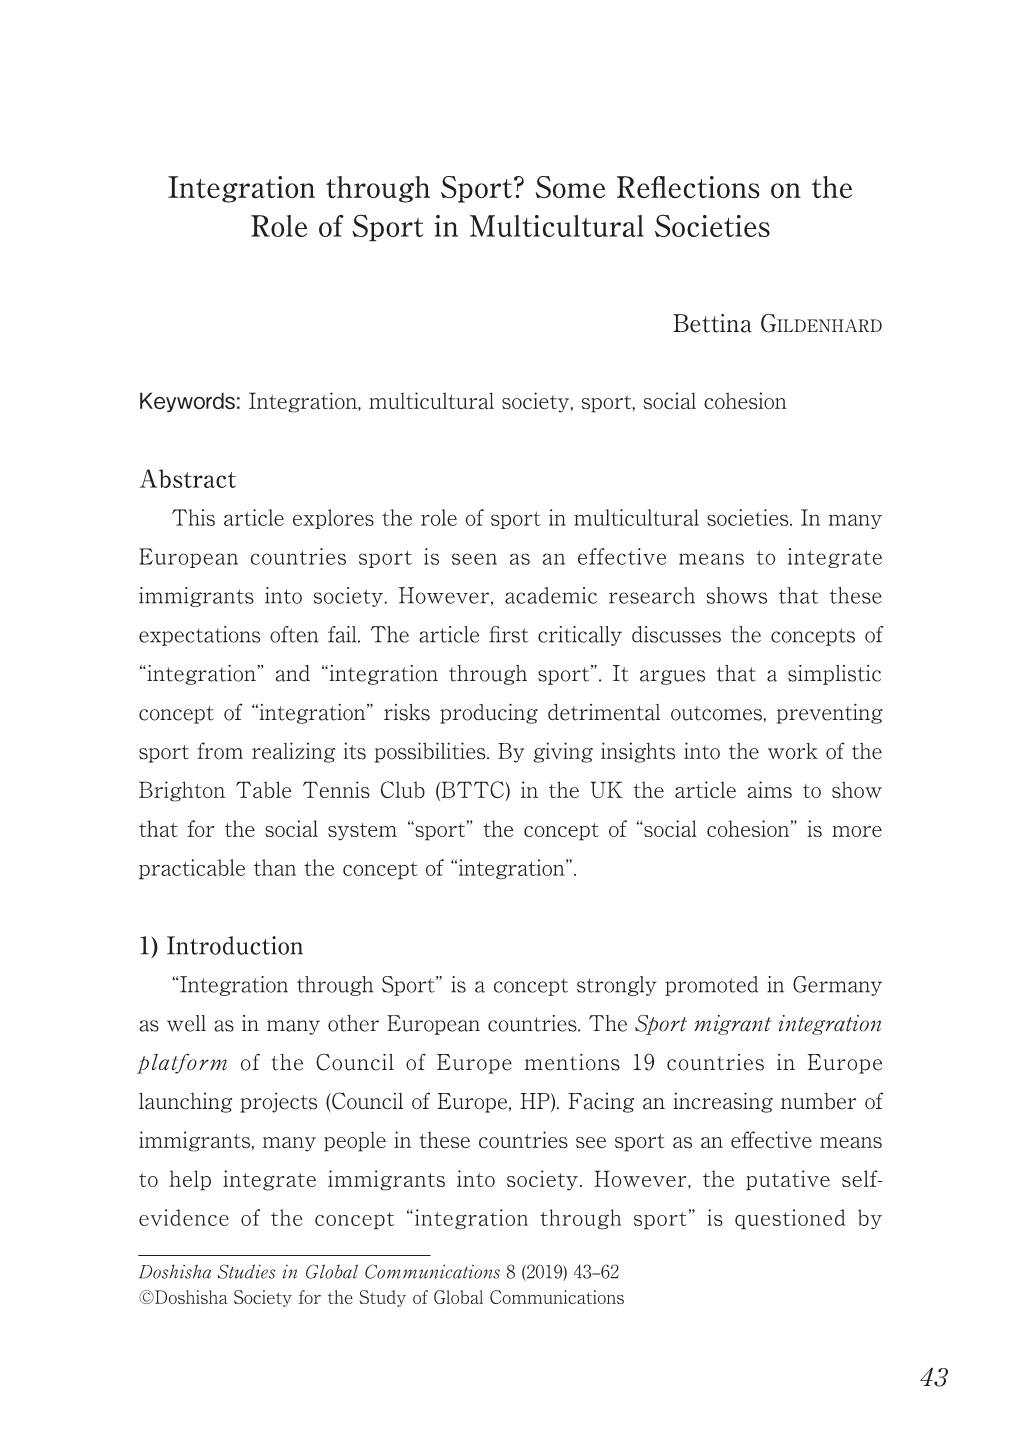 Some Reflections on the Role of Sport in Multicultural Societies